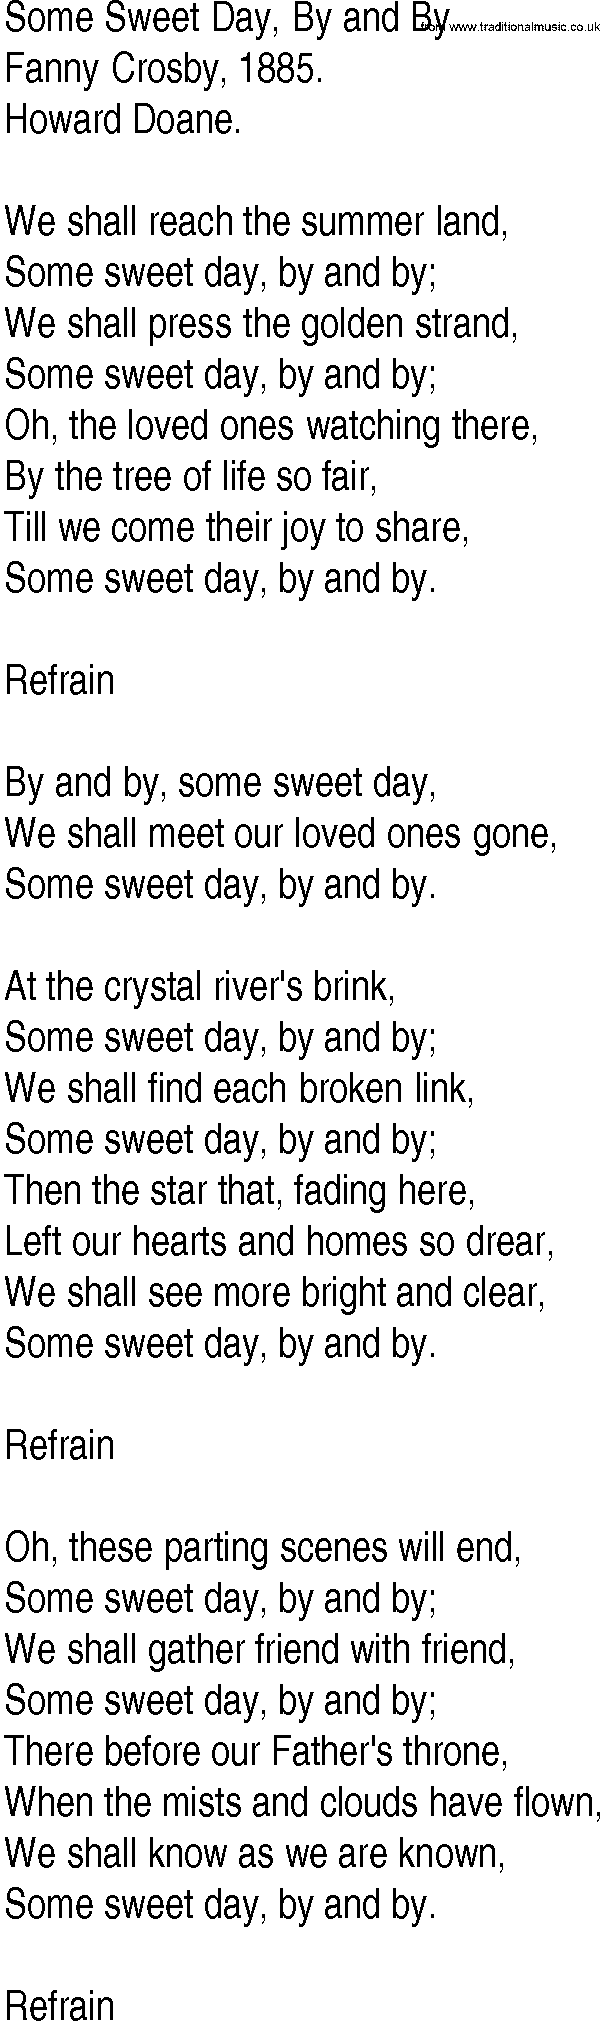 Hymn and Gospel Song: Some Sweet Day, By and By by Fanny Crosby lyrics